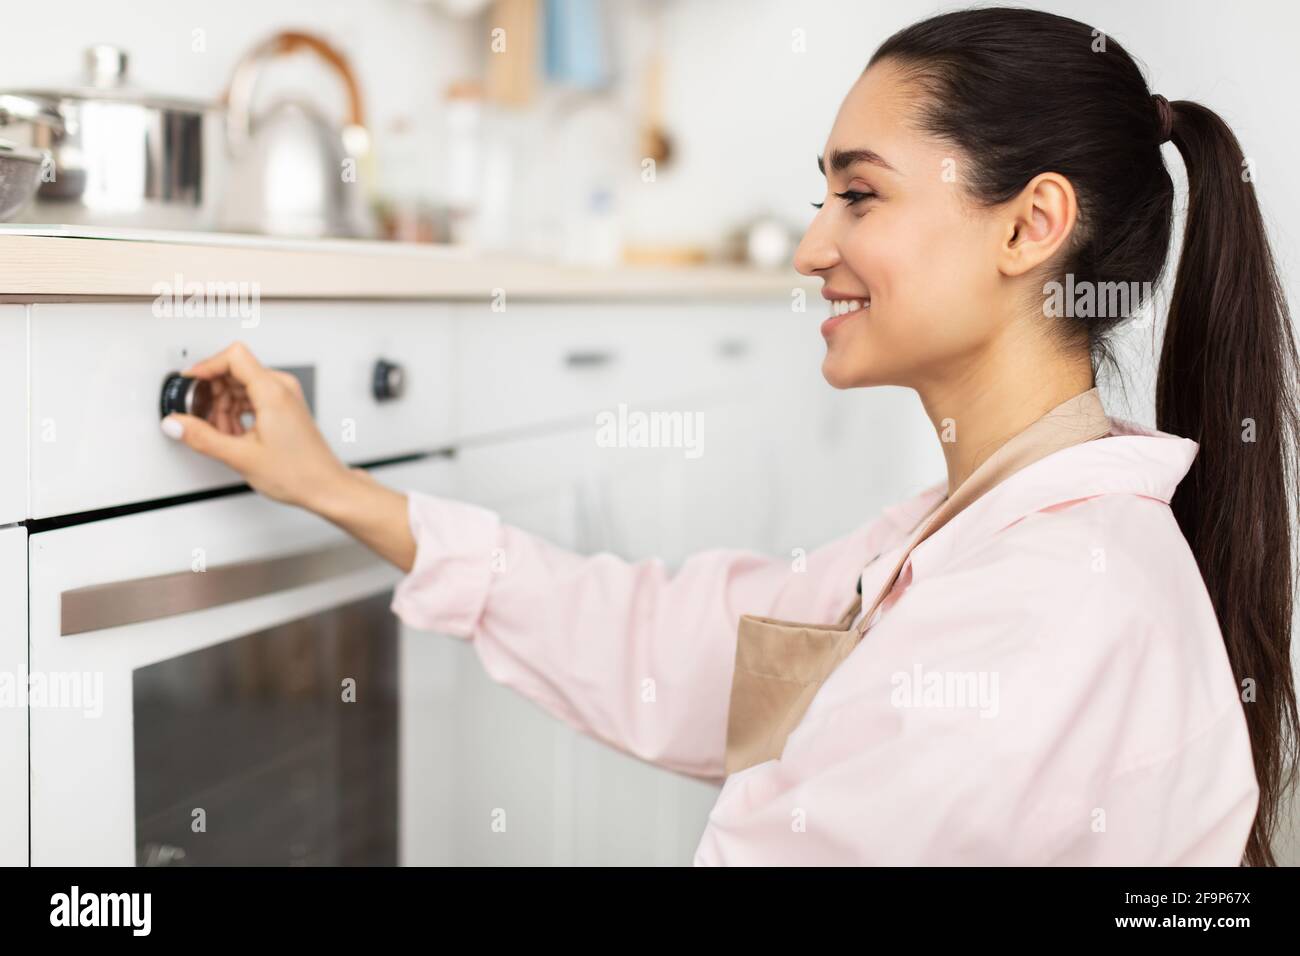 Woman using stove cooking food in kitchen Stock Photo